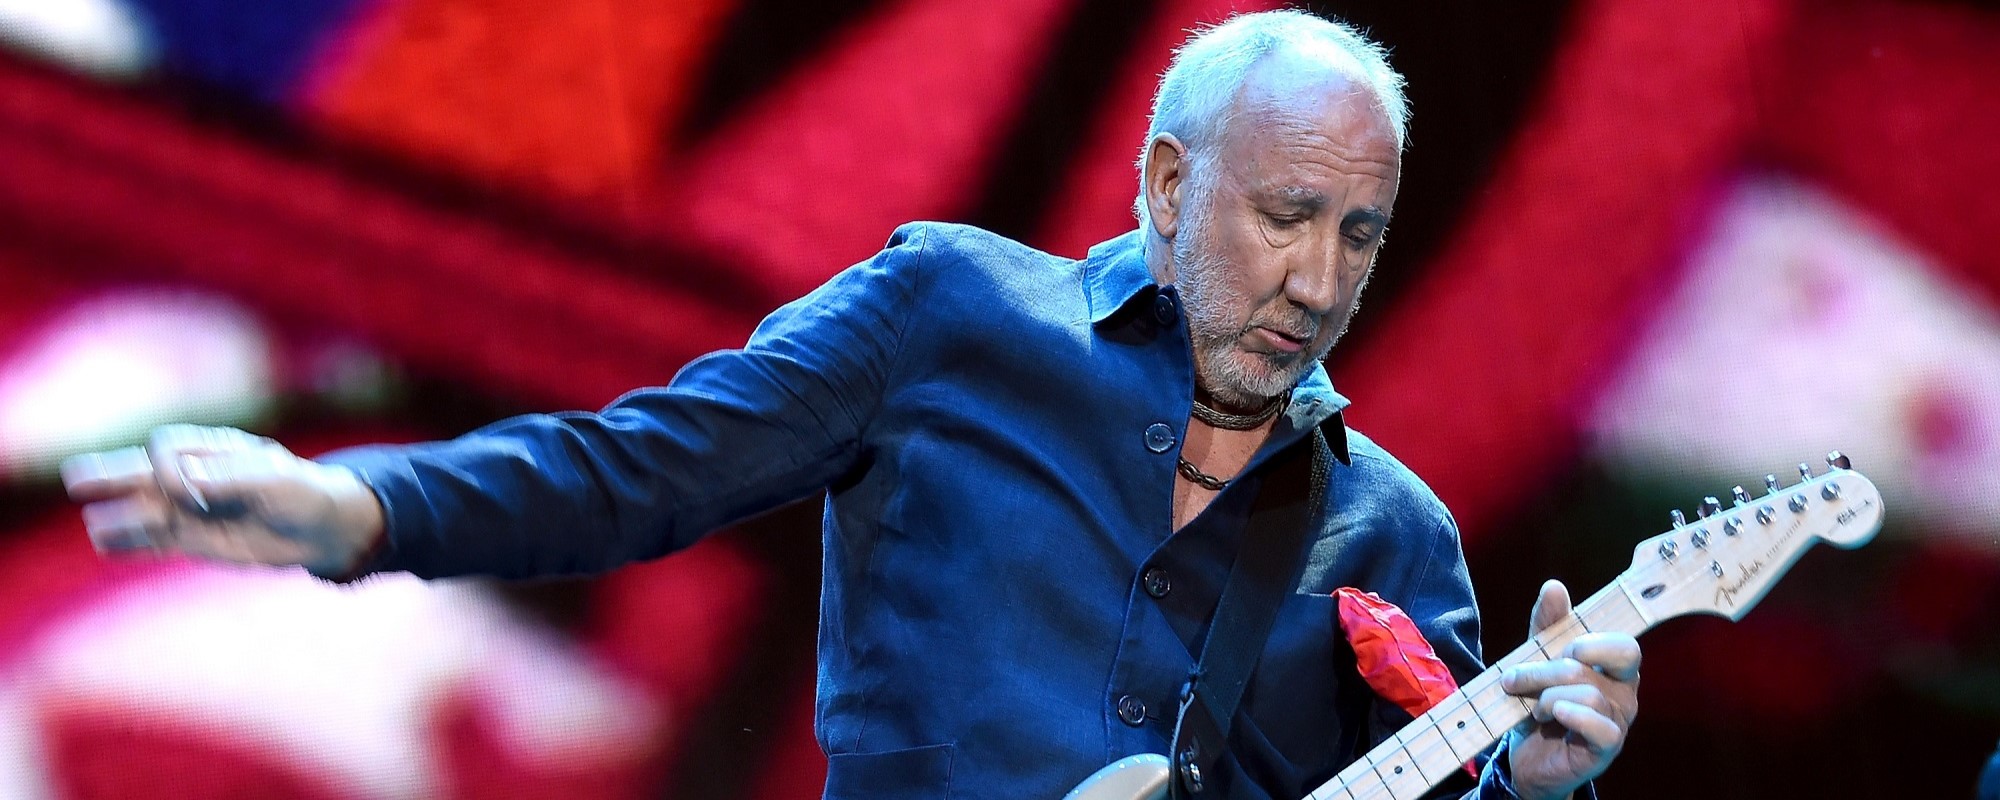 Pete Townshend Shares Onstage Trauma That Occurred While Performing ‘Tommy’ with The Who in 2017